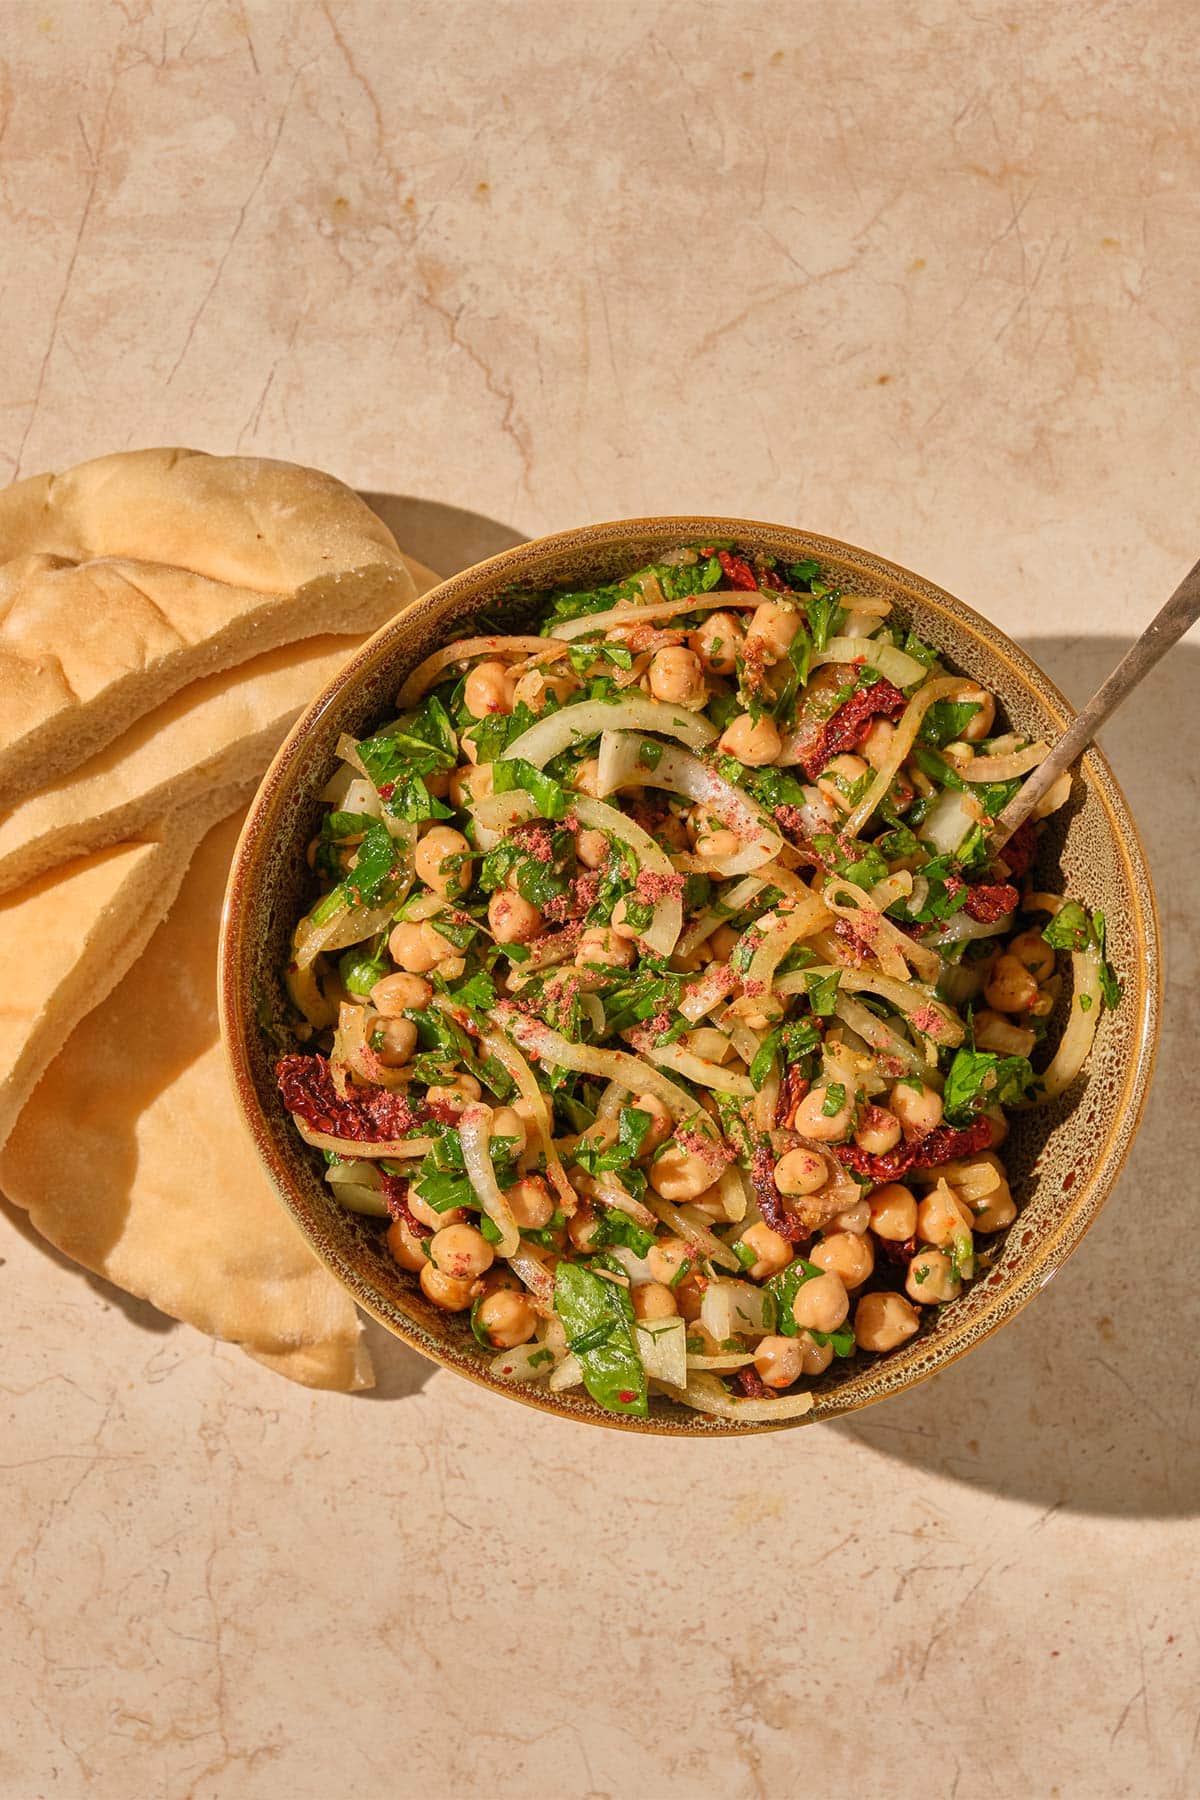 Turkish Chickpea Salad in brown bowl with serving spoon and side of pita bread.